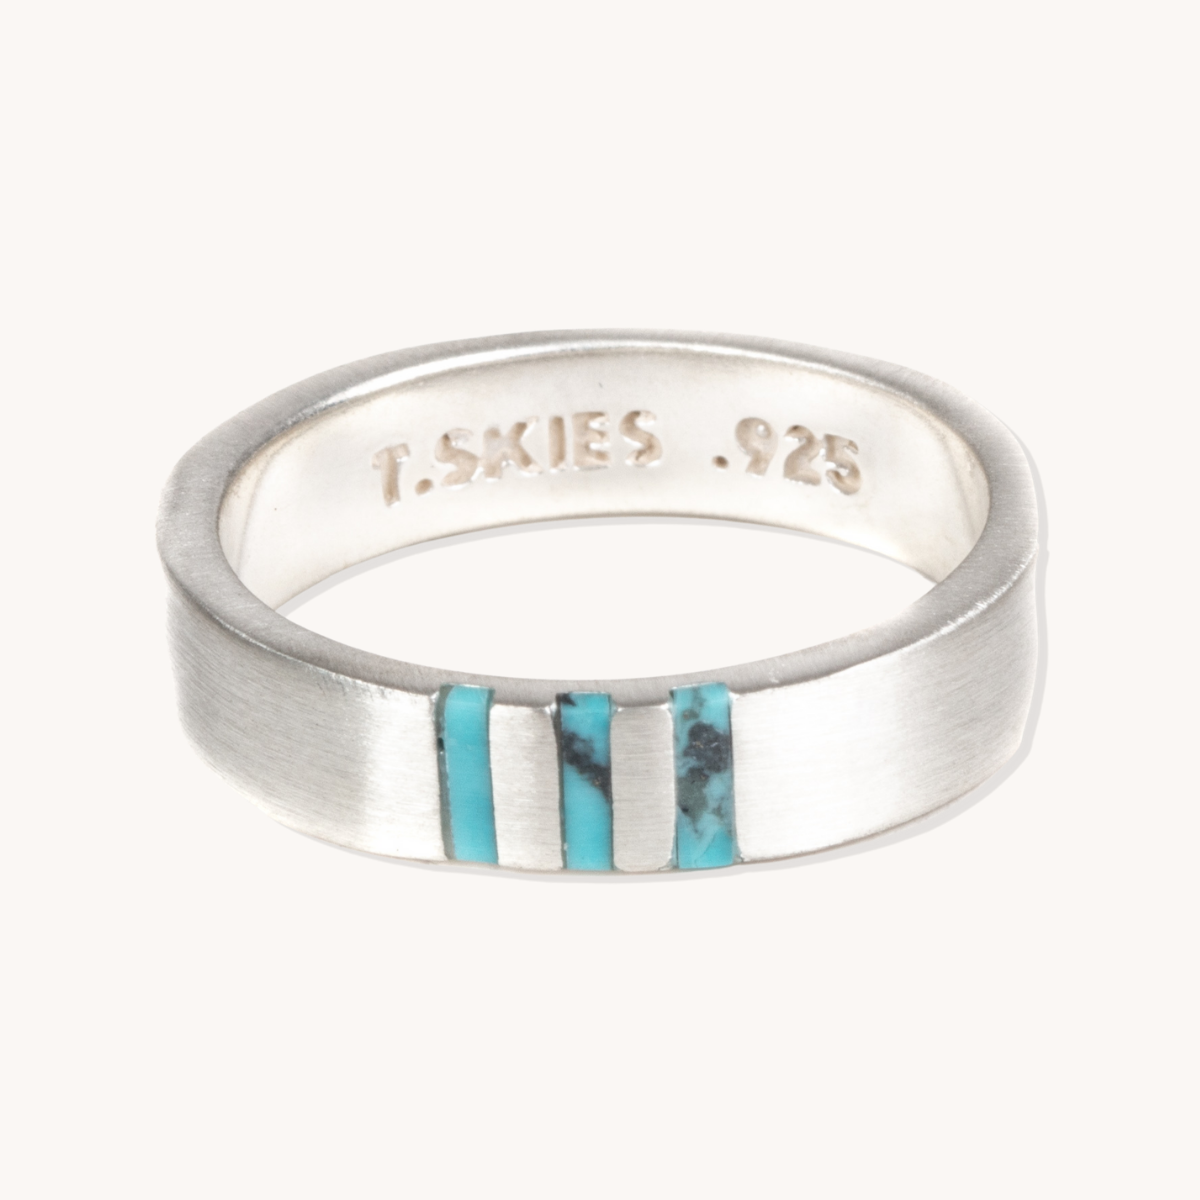 Turquoise Wedding Band Ring | T.Skies Jewelry